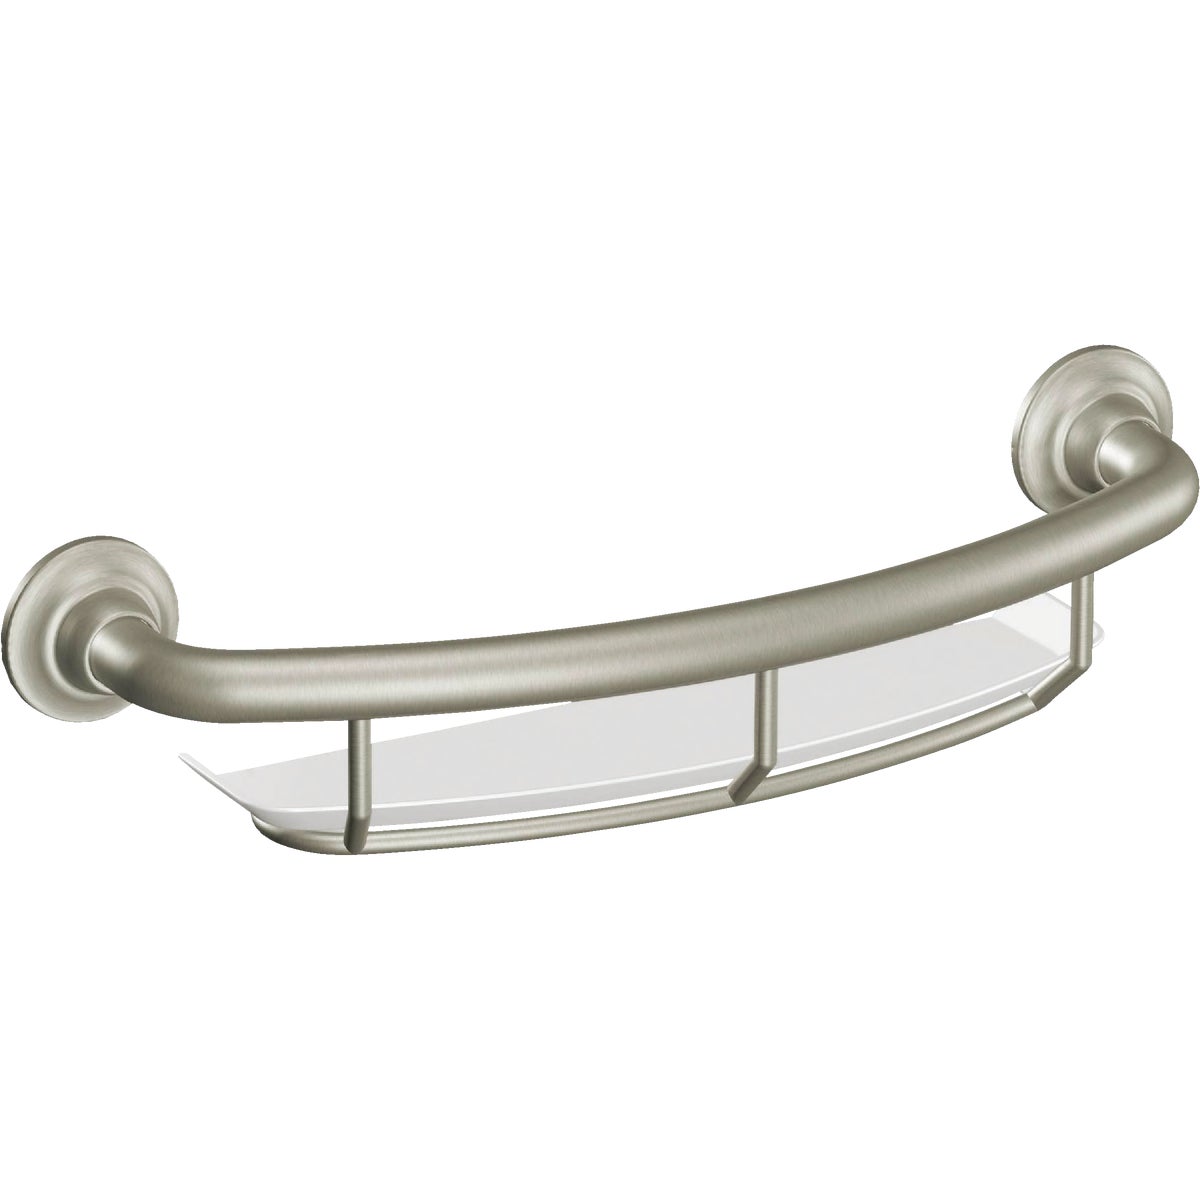 Item 403347, Gracious and uncomplicated style features give the Grab Bar collection an 